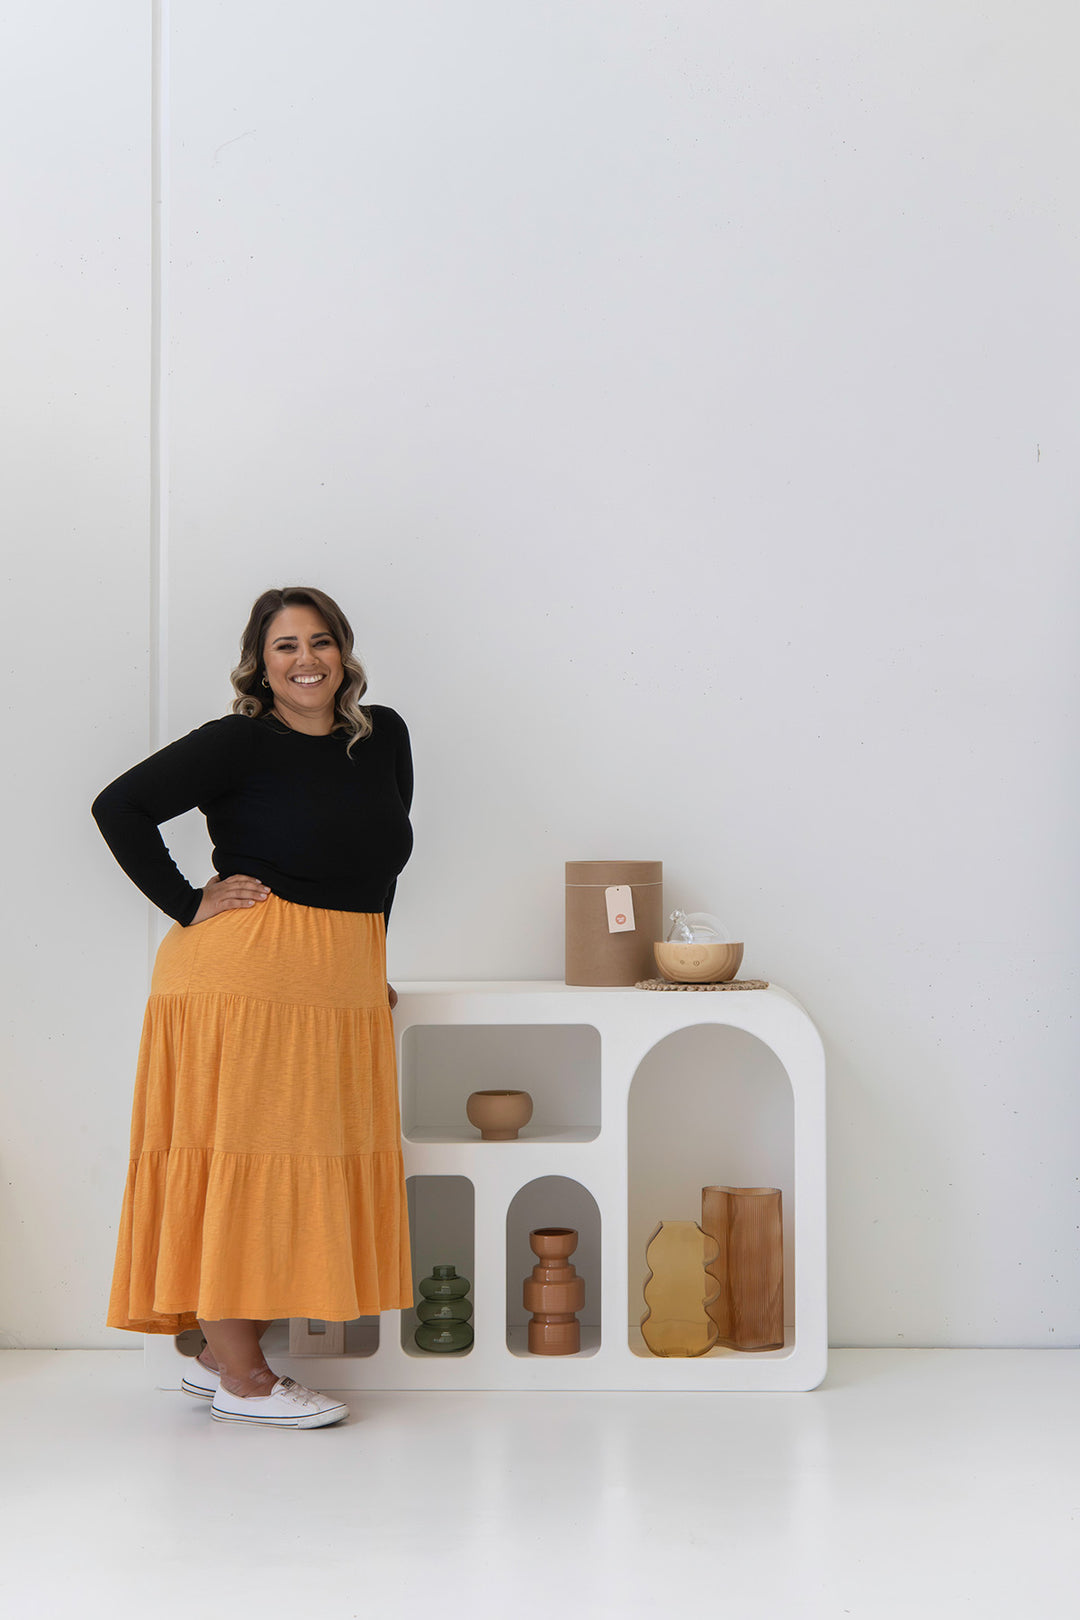 Photo of our founder Rachaellee, the driving force behind Oillyvibes' mindful home decor